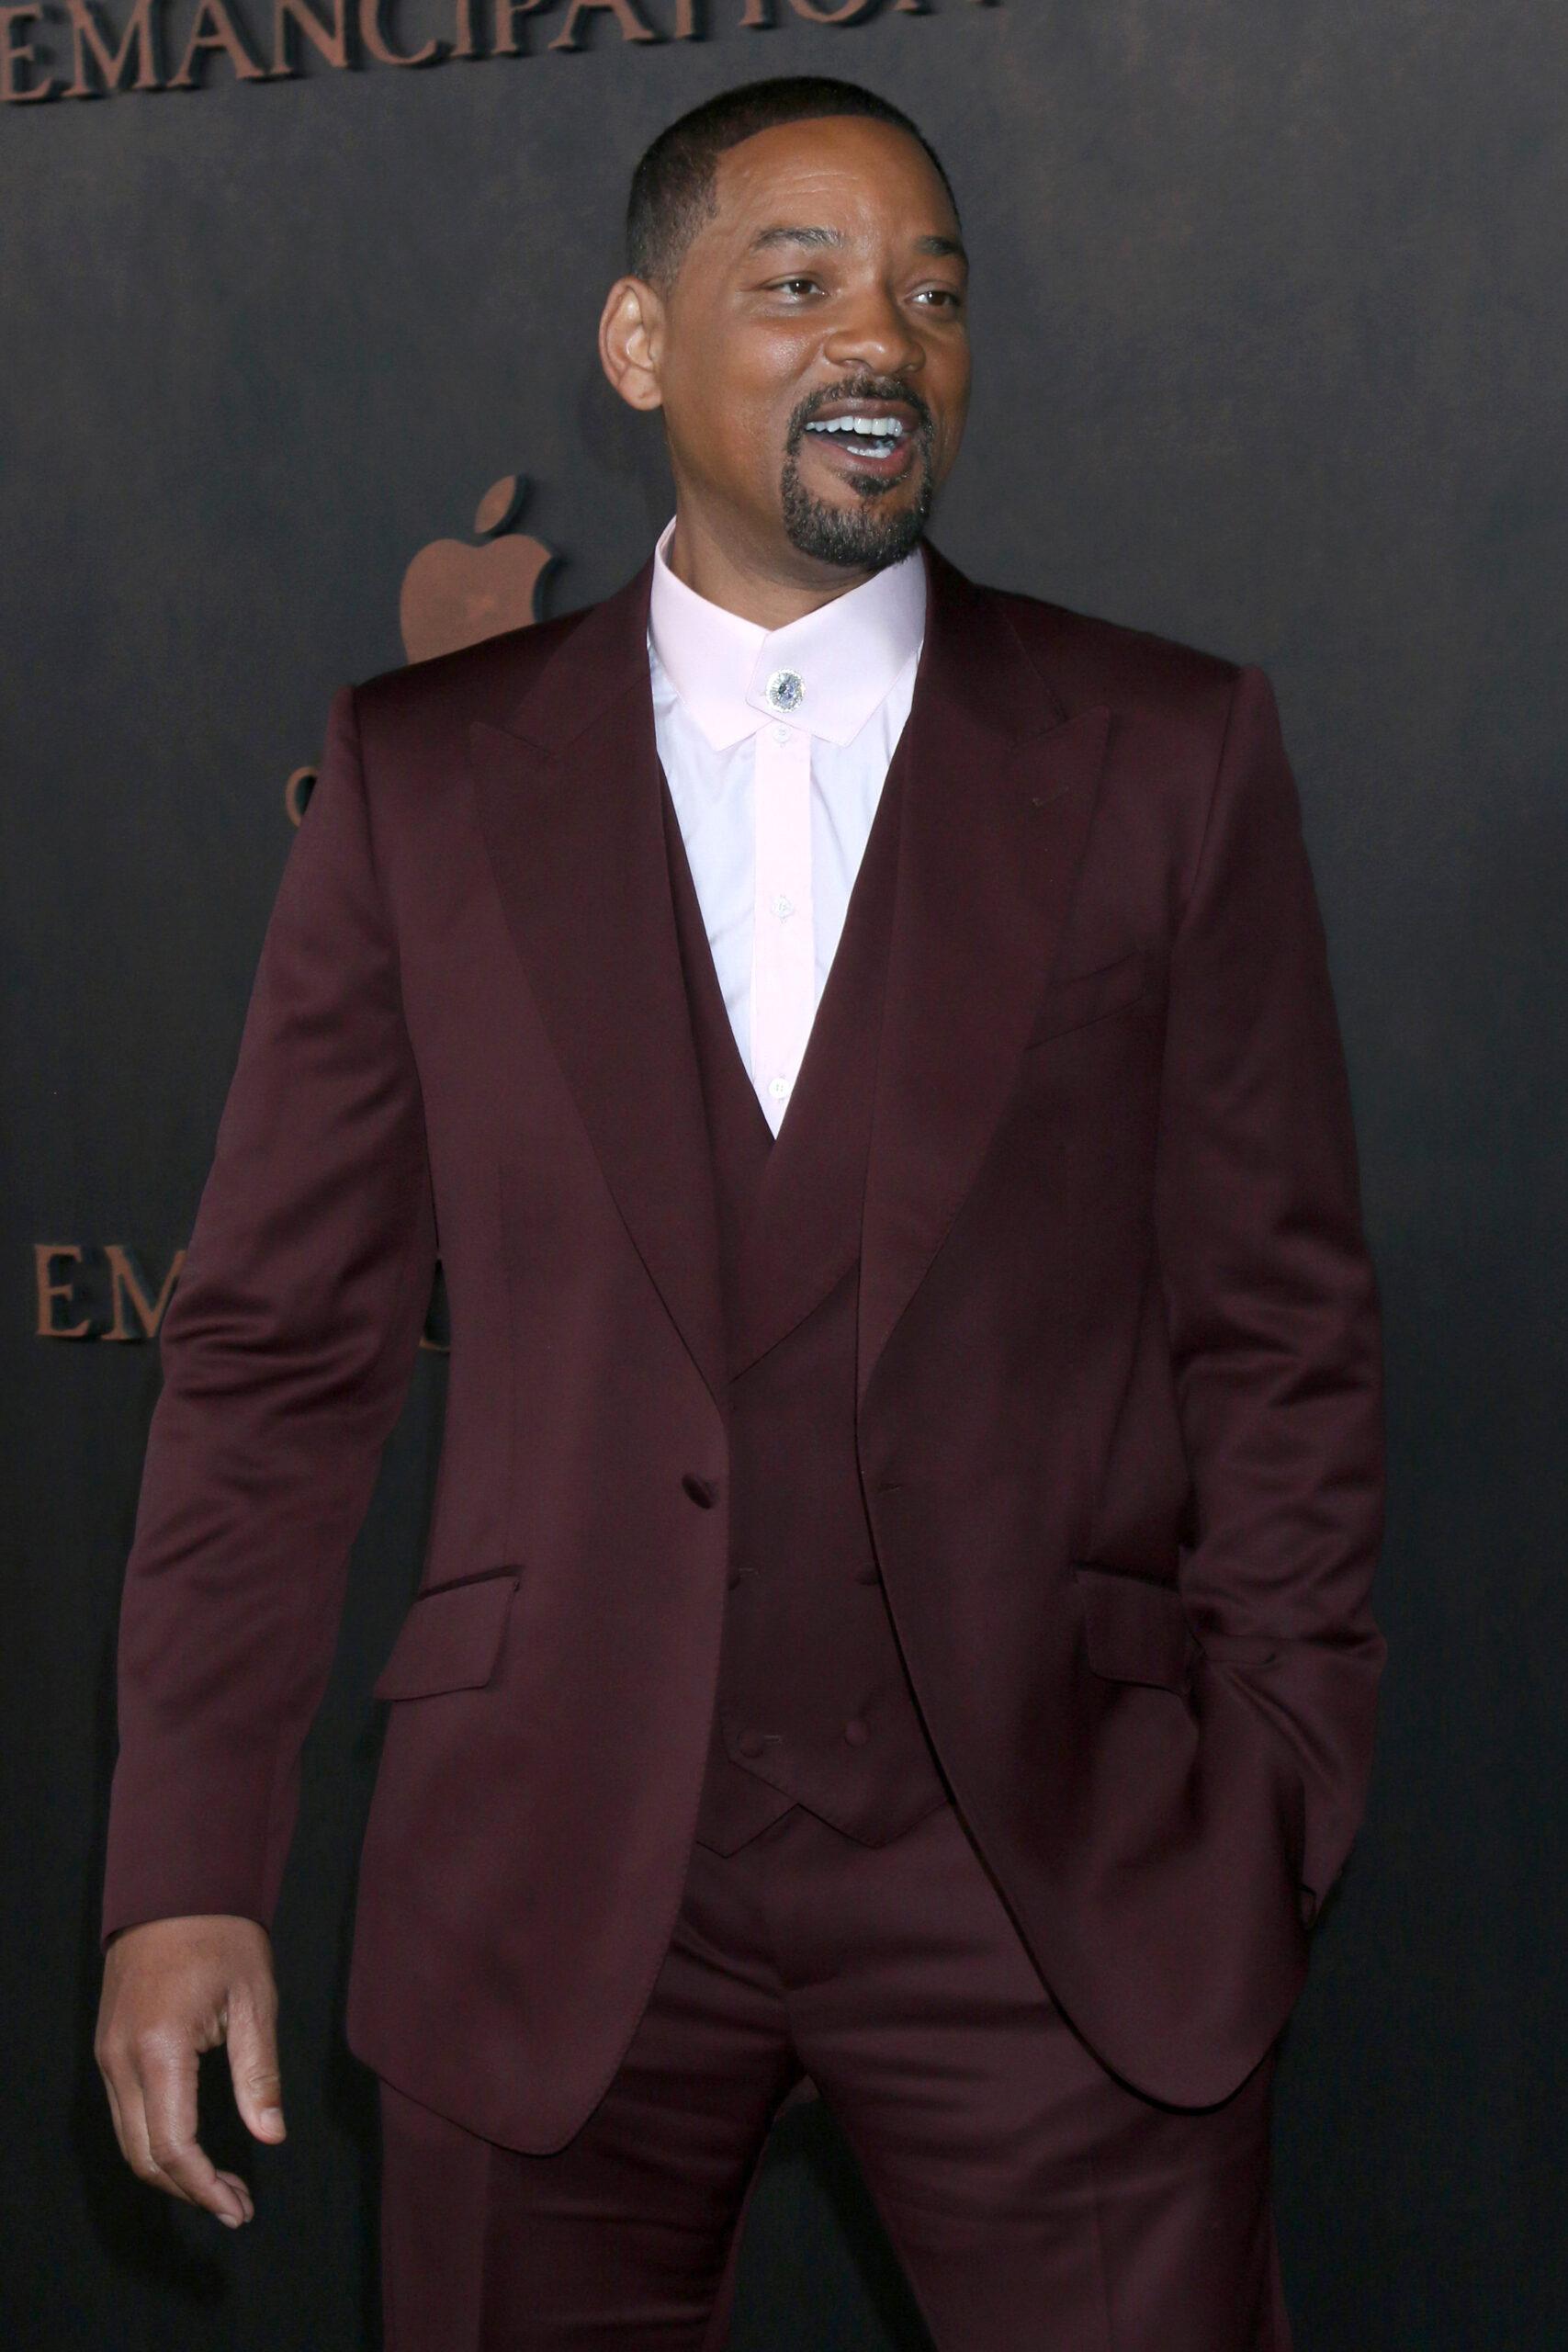 Will Smith at the Emancipation Premiere at Village Theater on November 30, 2022 in Westwood, CA